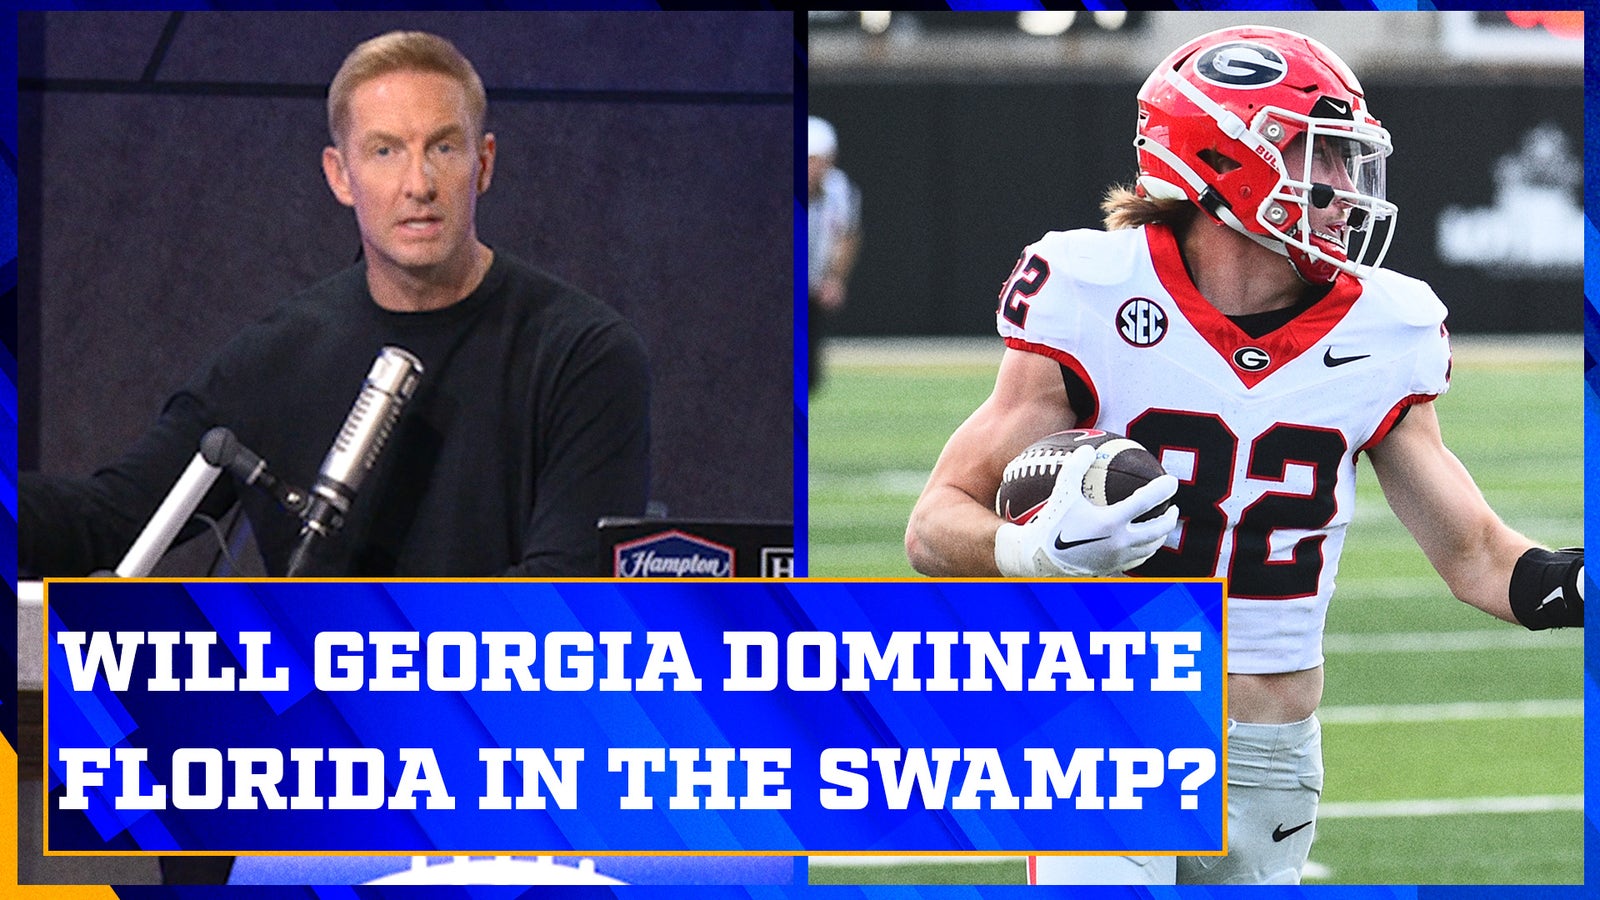 Can Florida make it a game against No. 1 Georgia in The Swamp?